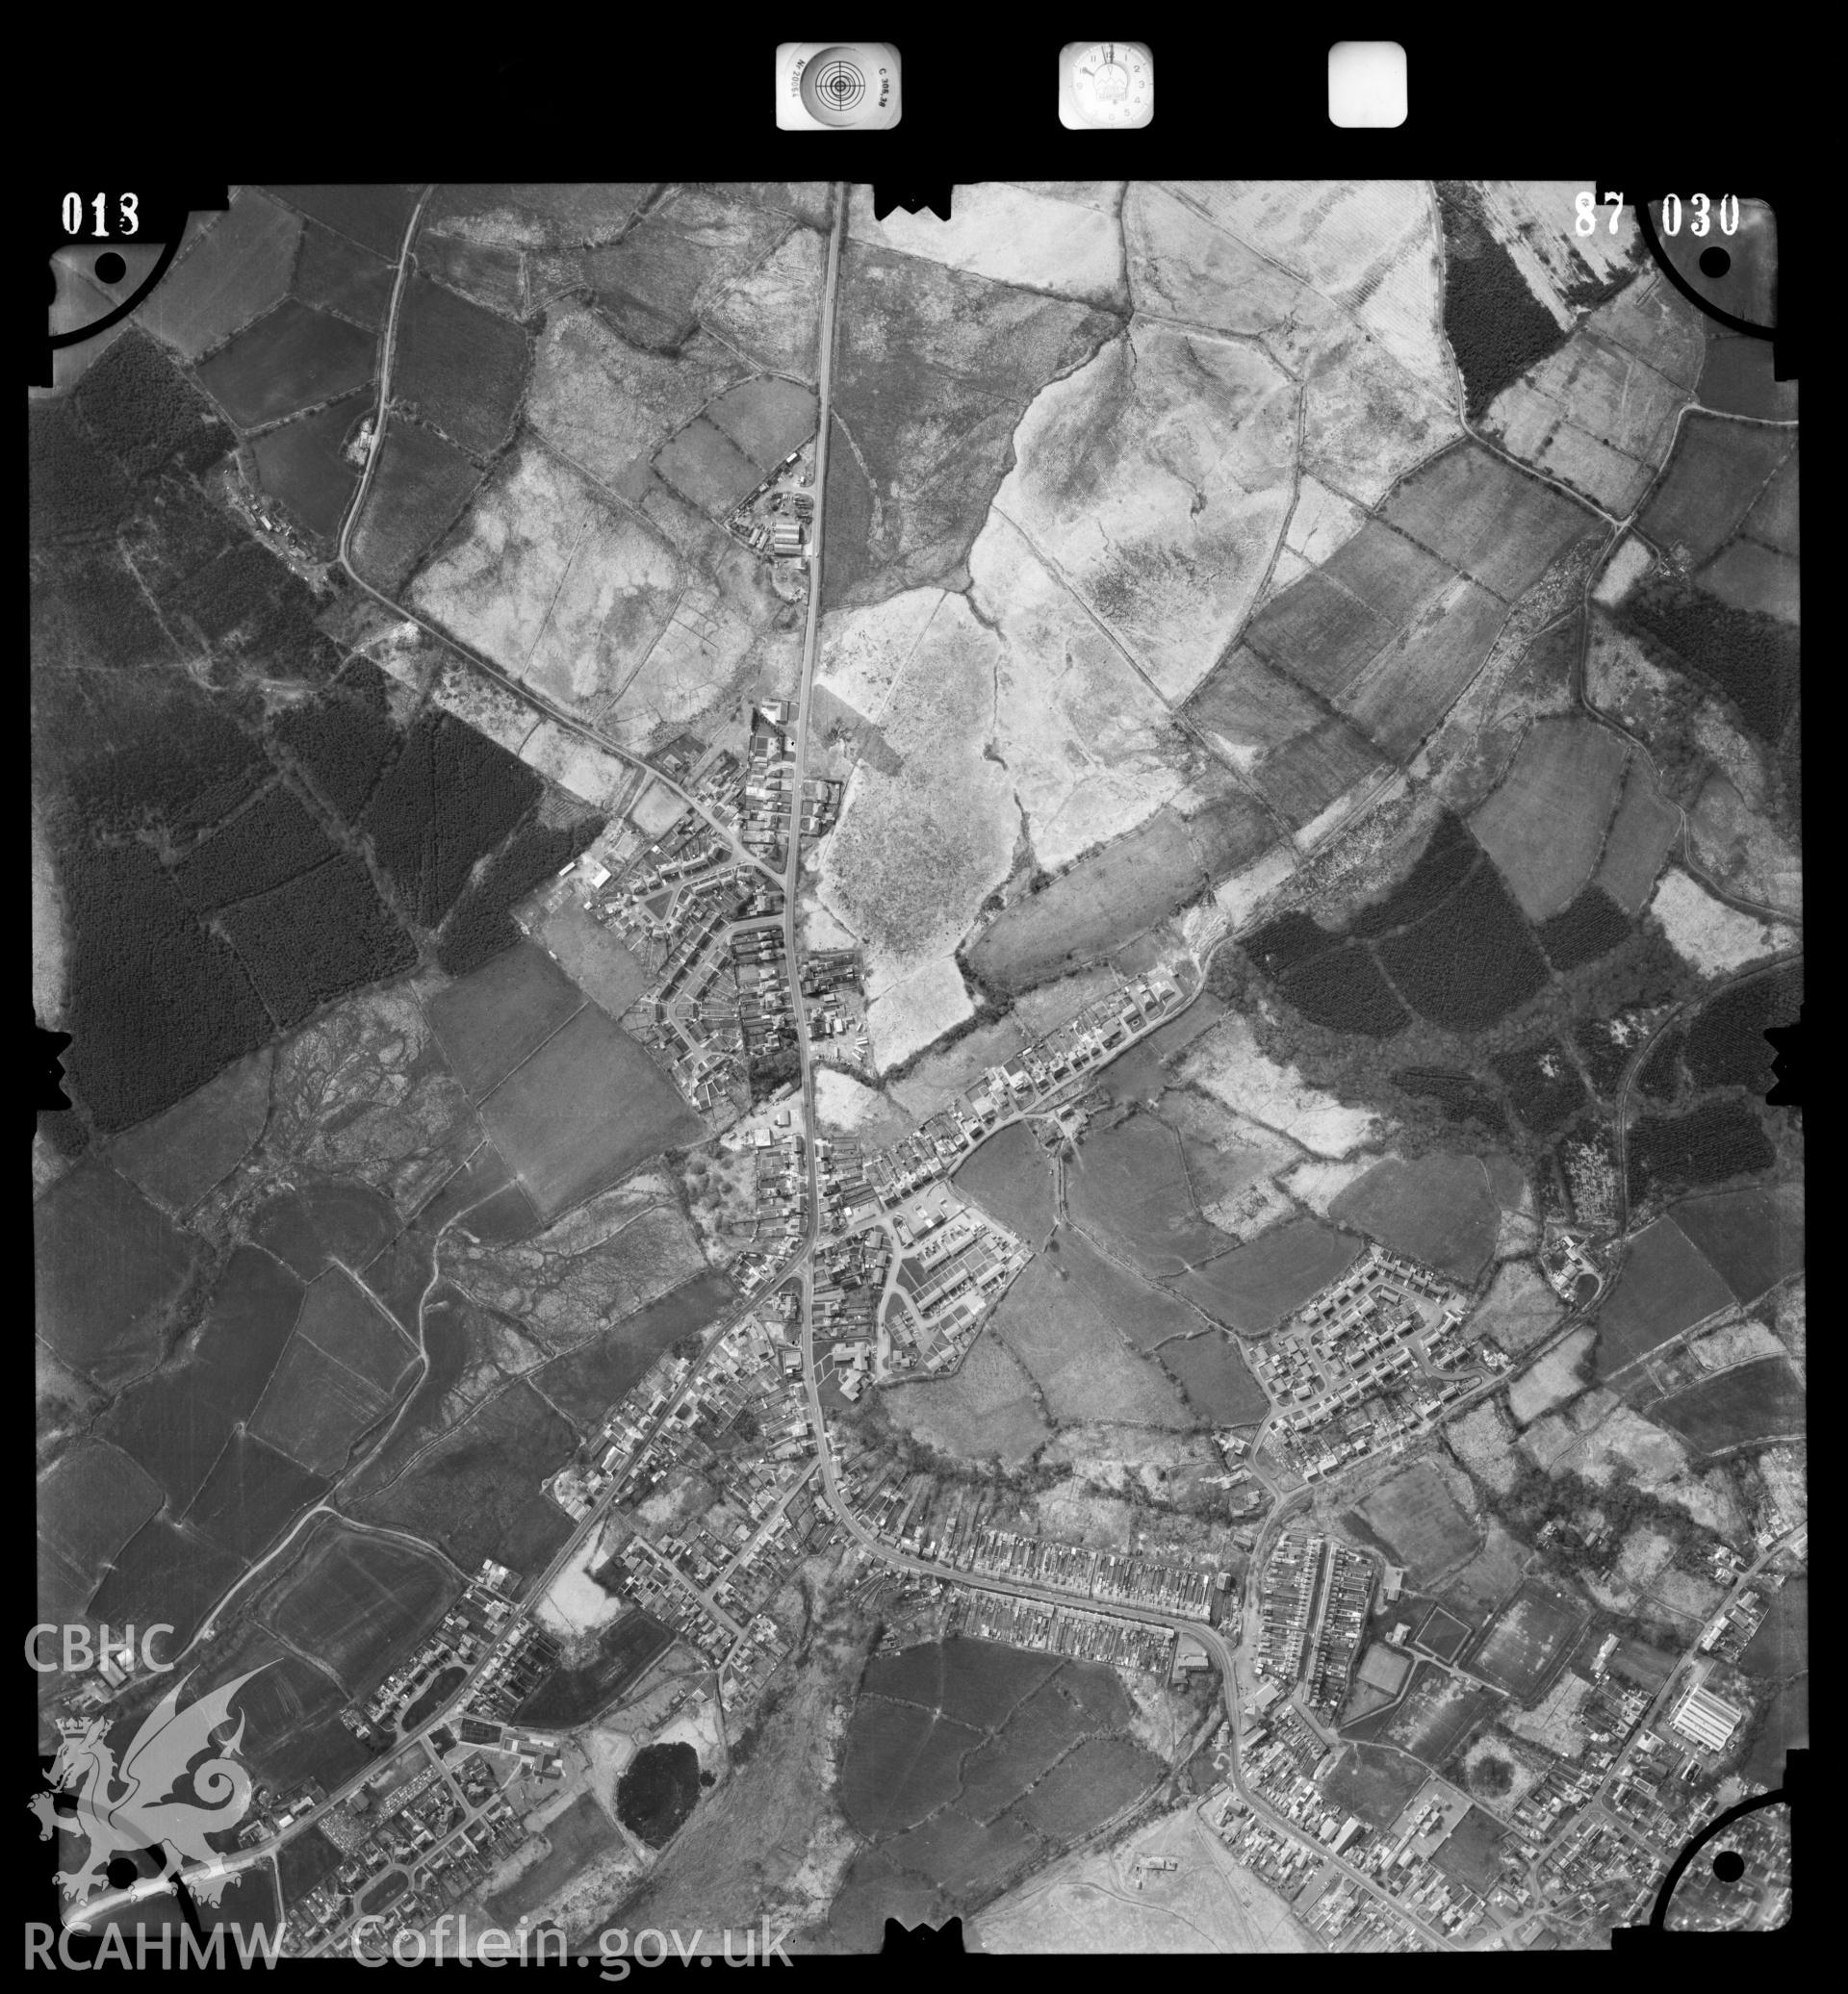 Digitized copy of an aerial photograph showing the Tumble area, taken by Ordnance Survey, 1987.